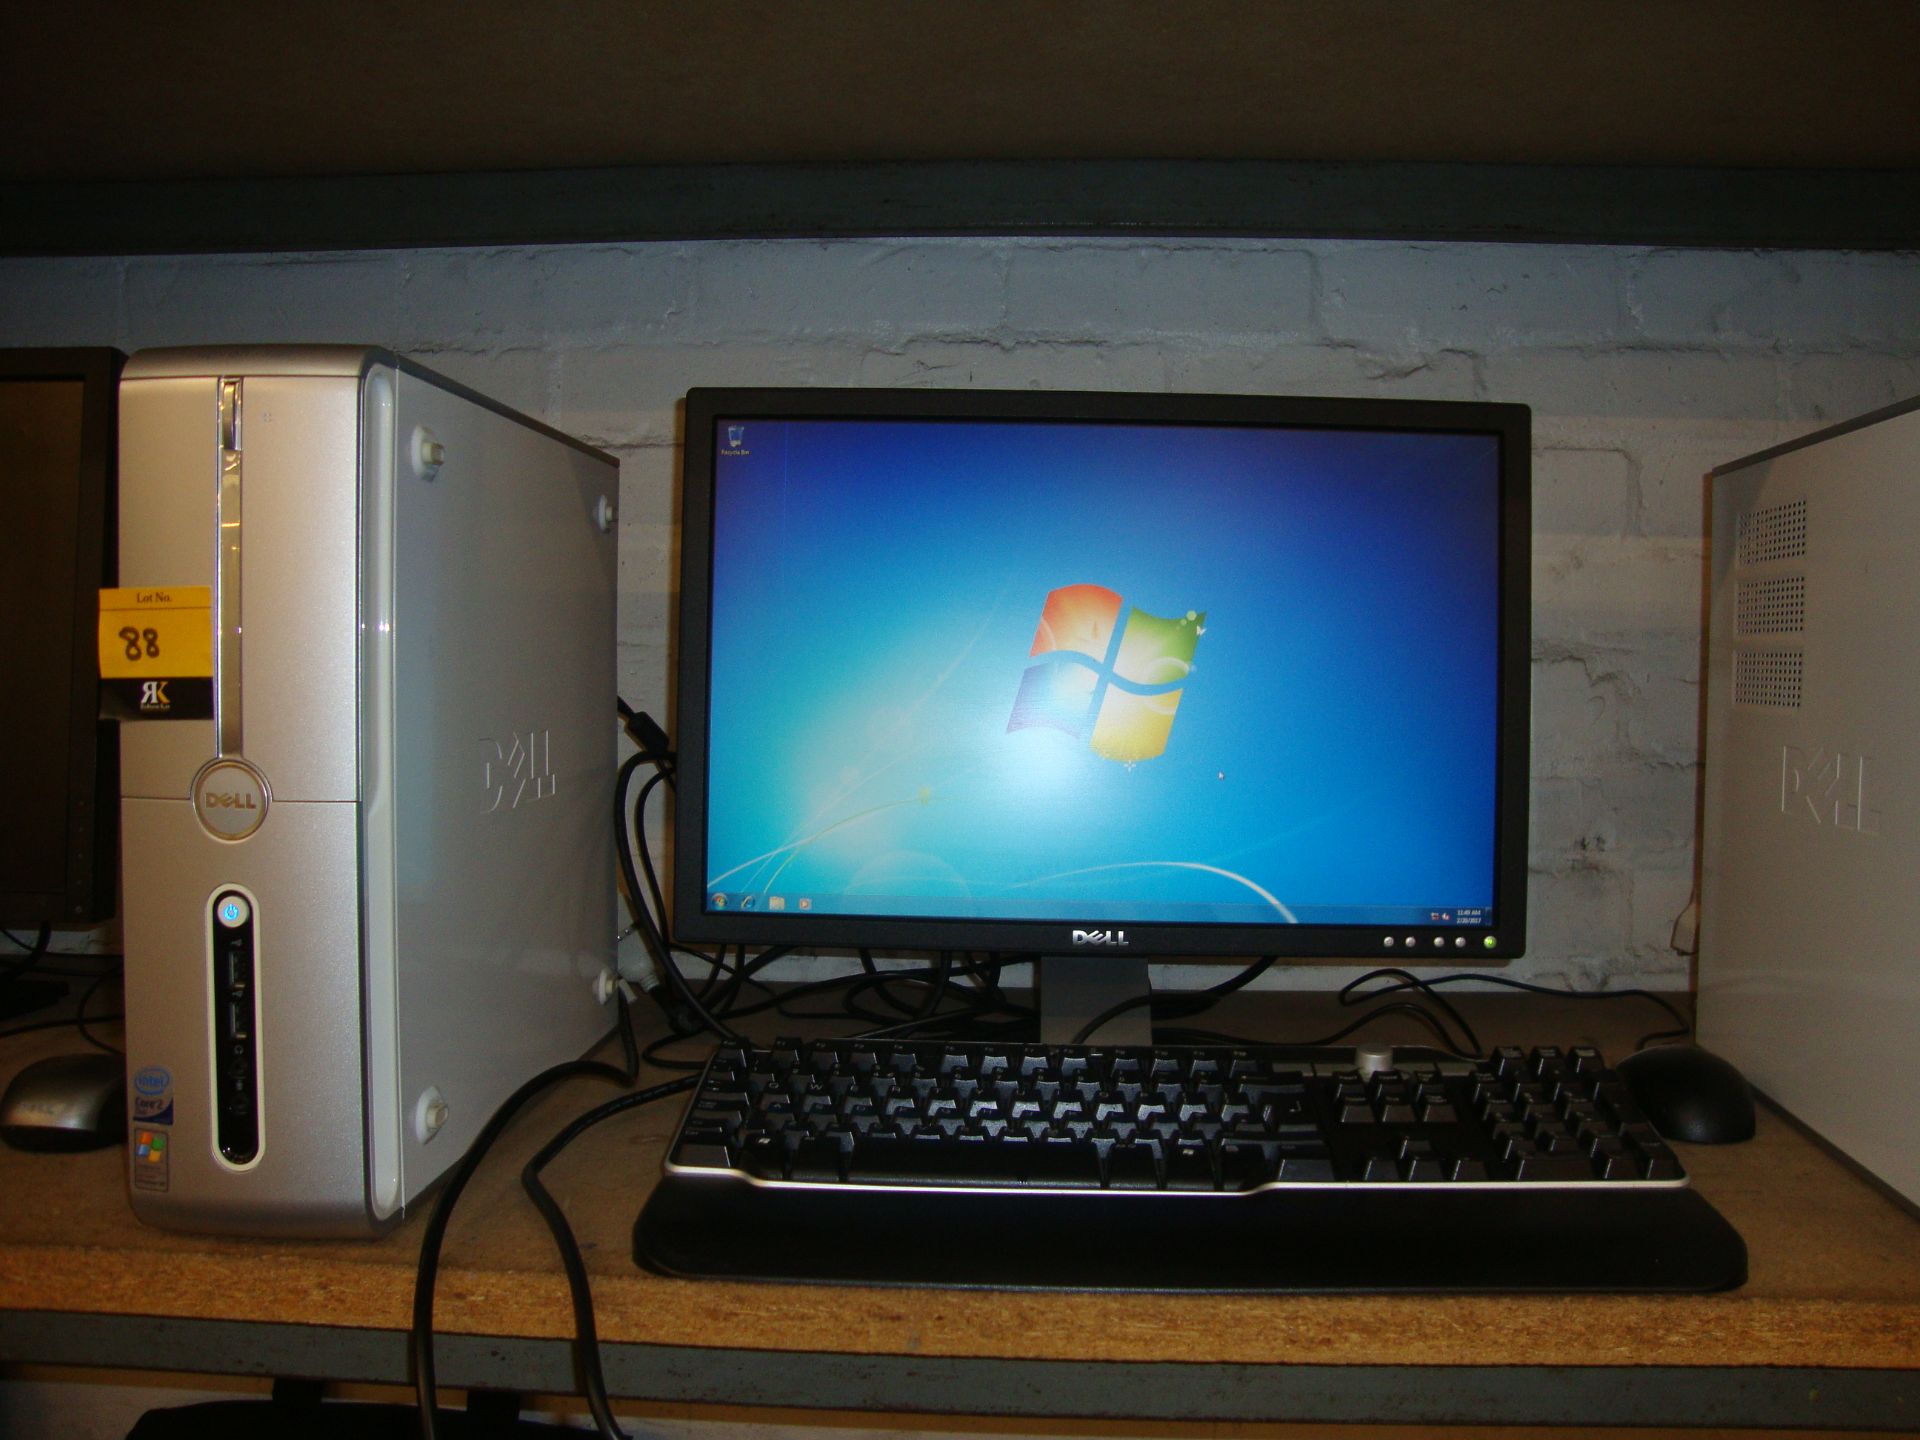 Dell Inspiron 530S Intel Core 2 Duo tower desktop computer including Dell widescreen LCD monitor - Image 2 of 5